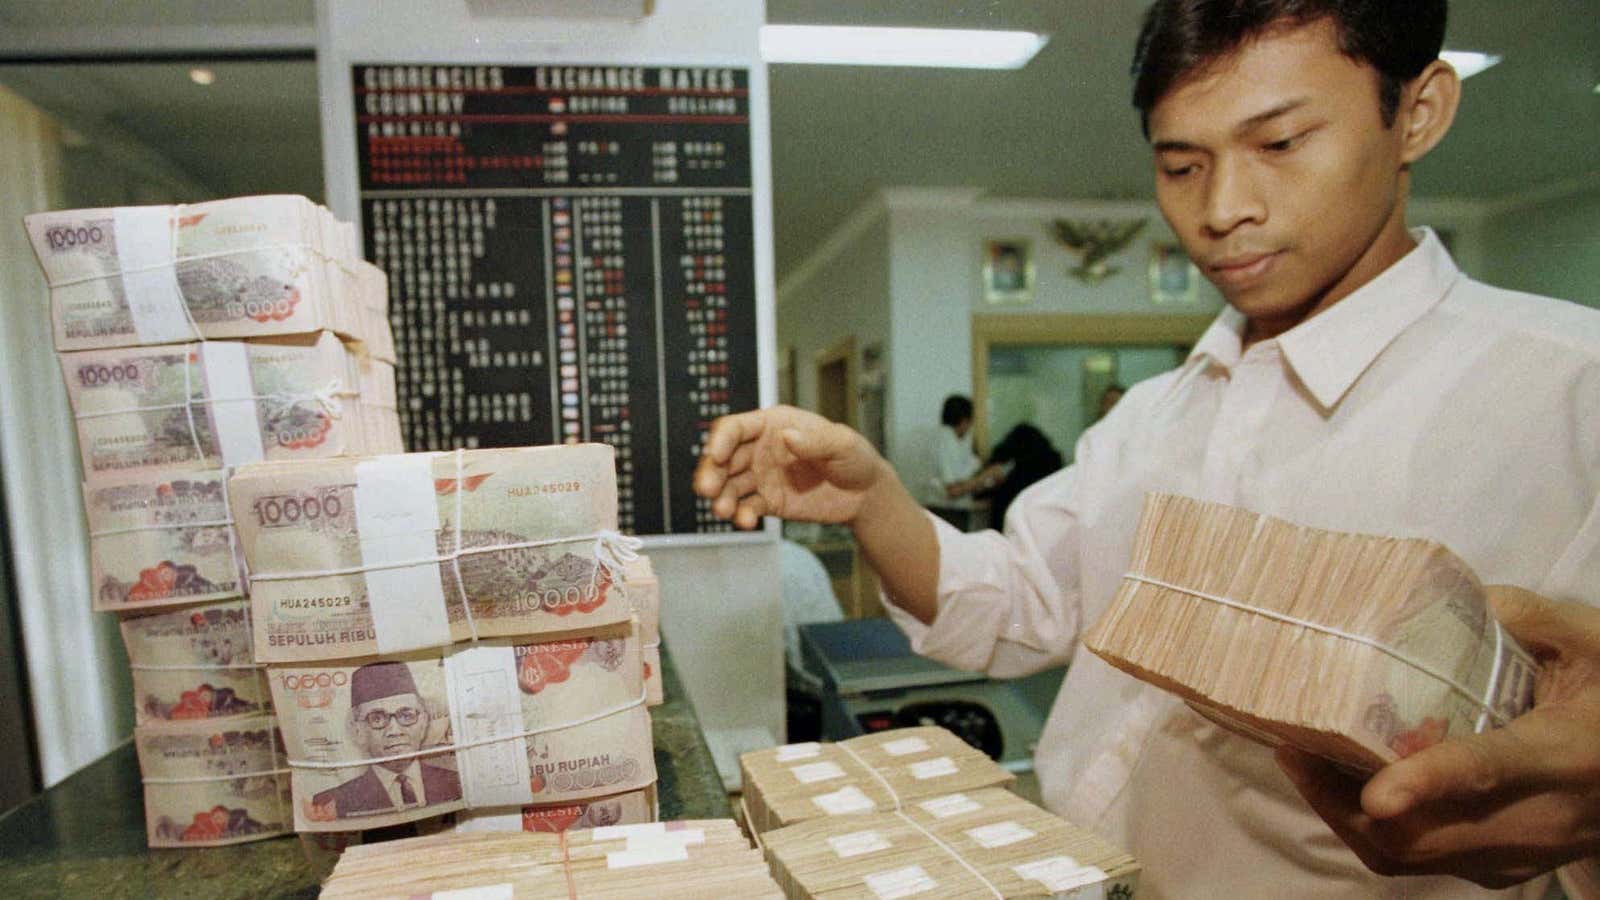 The “Asian contagion” of 1997-98 sent the value of Indonesia’s rupiah tumbling.